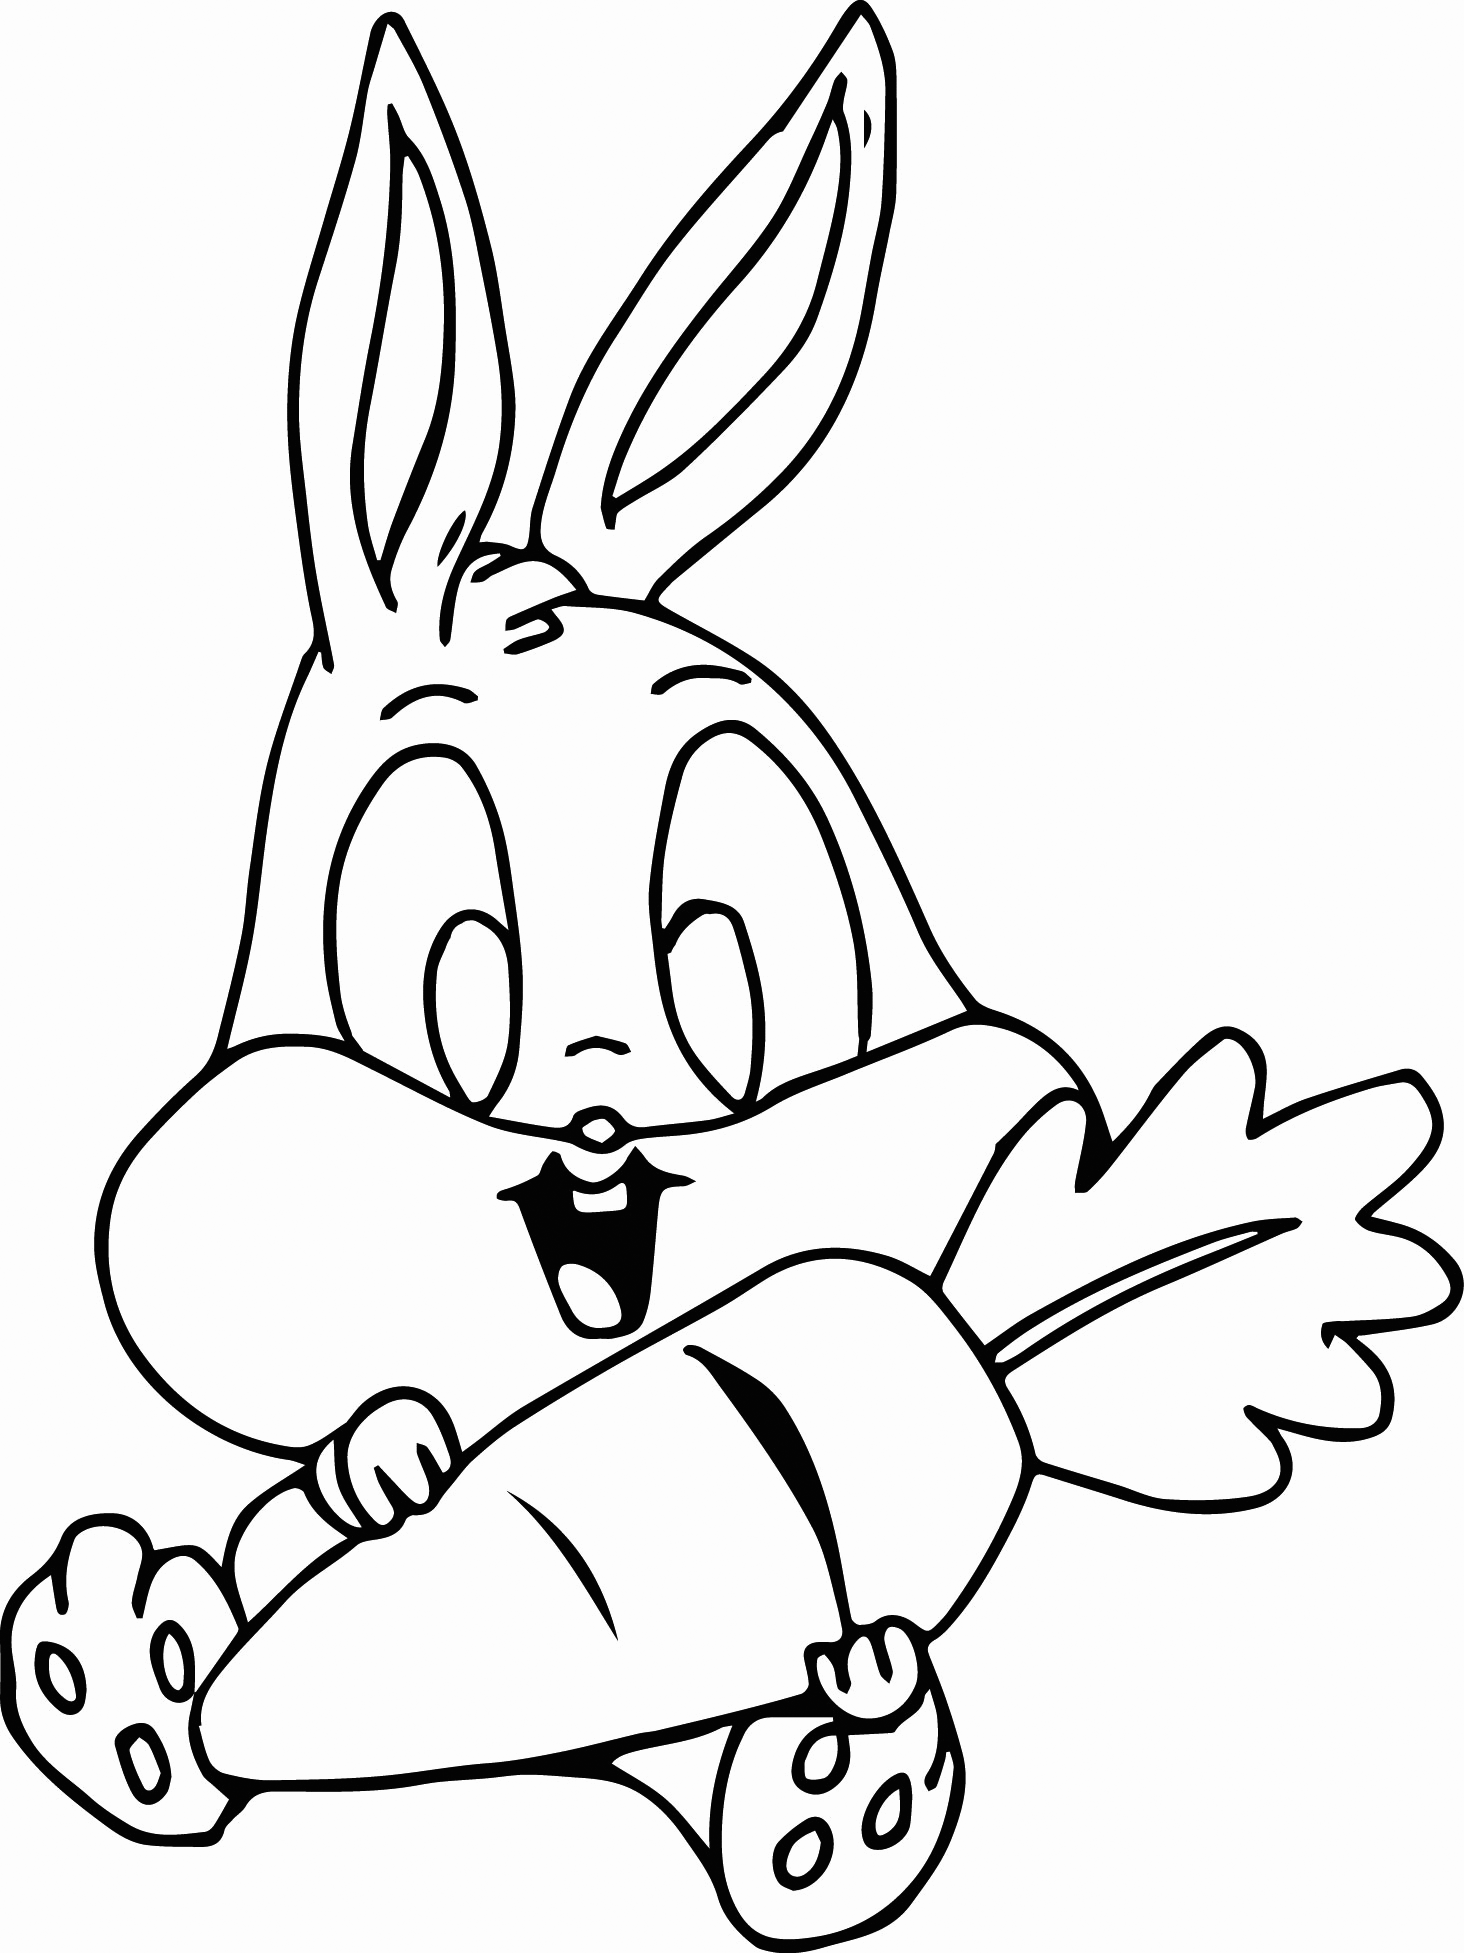 Download Carrot Coloring Pages - Best Coloring Pages For Kids